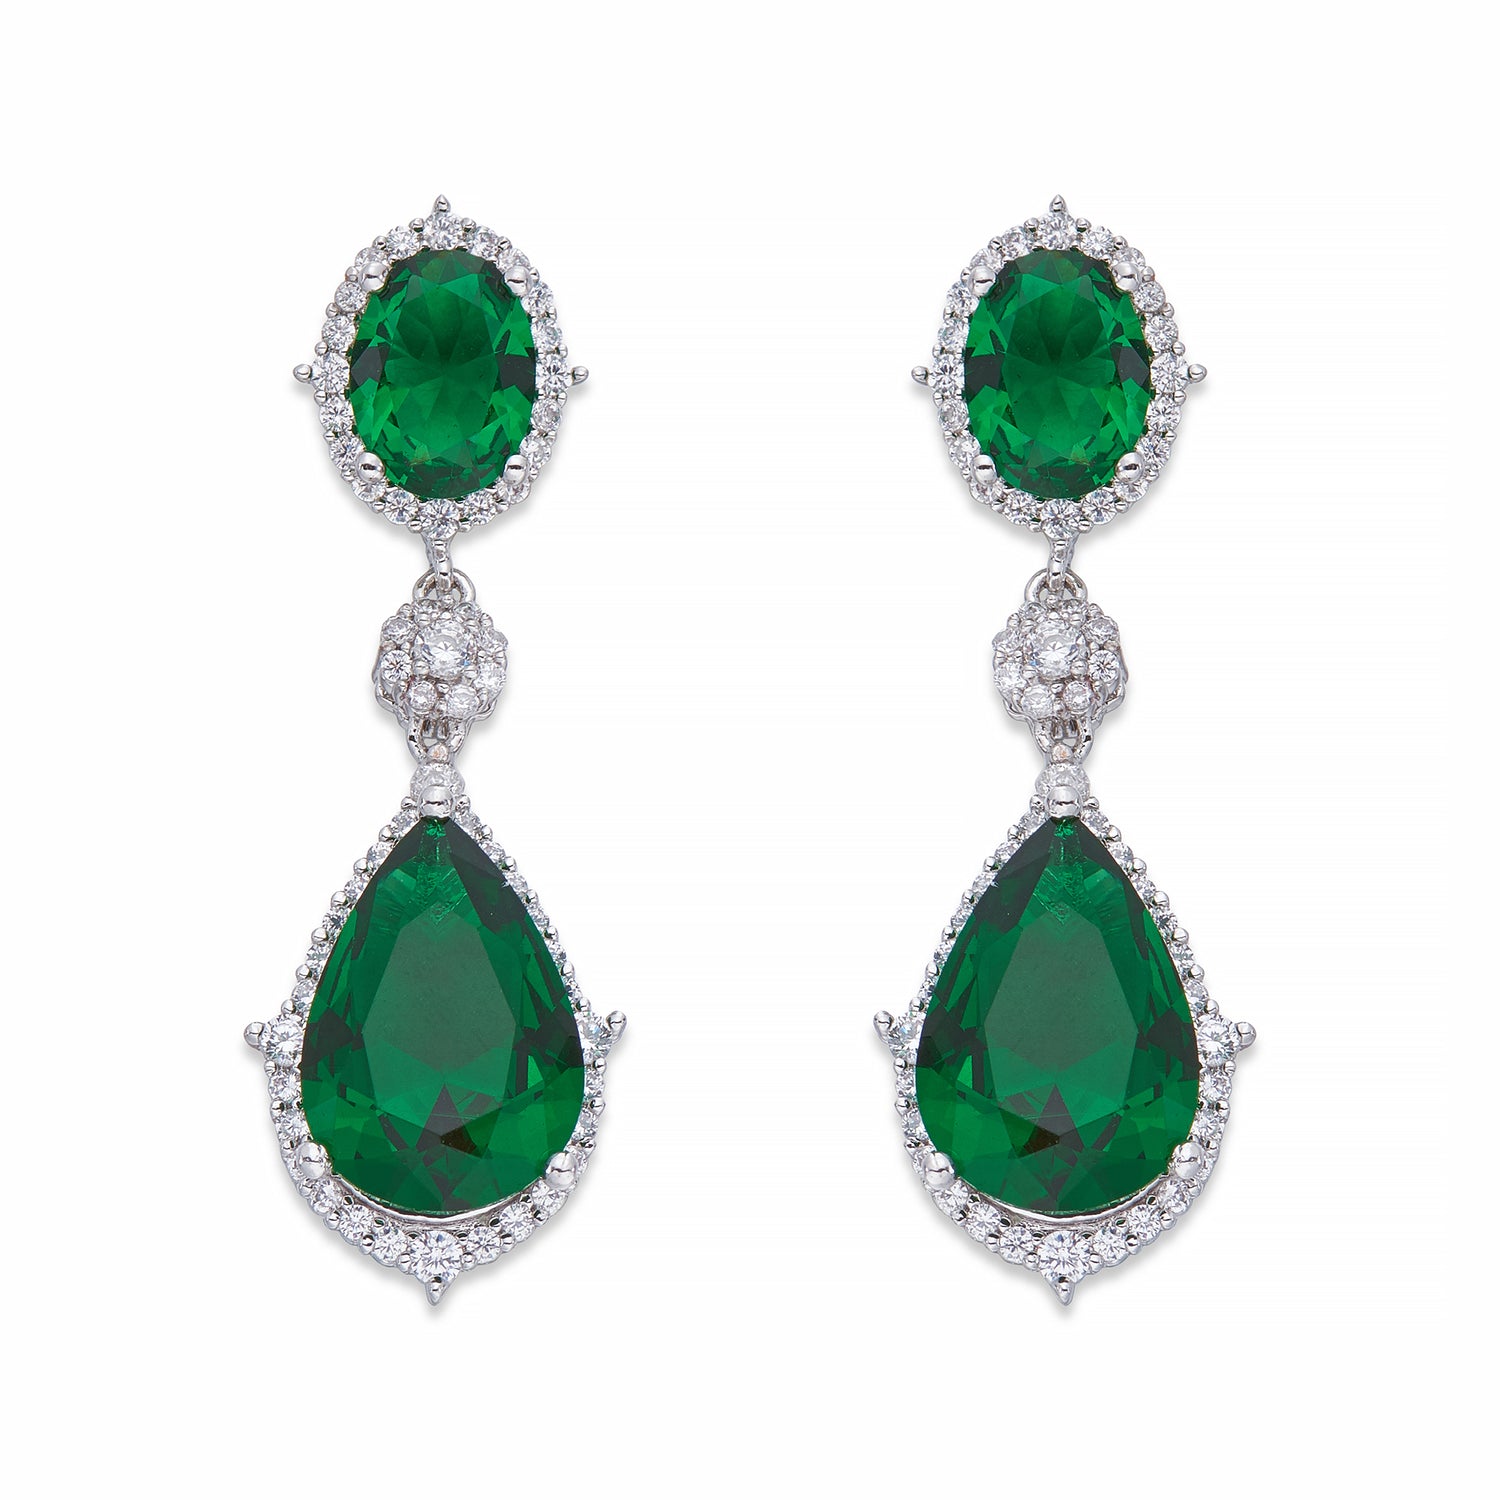 Green Crystals on Silver Dangle Earrings | ${Vendor}